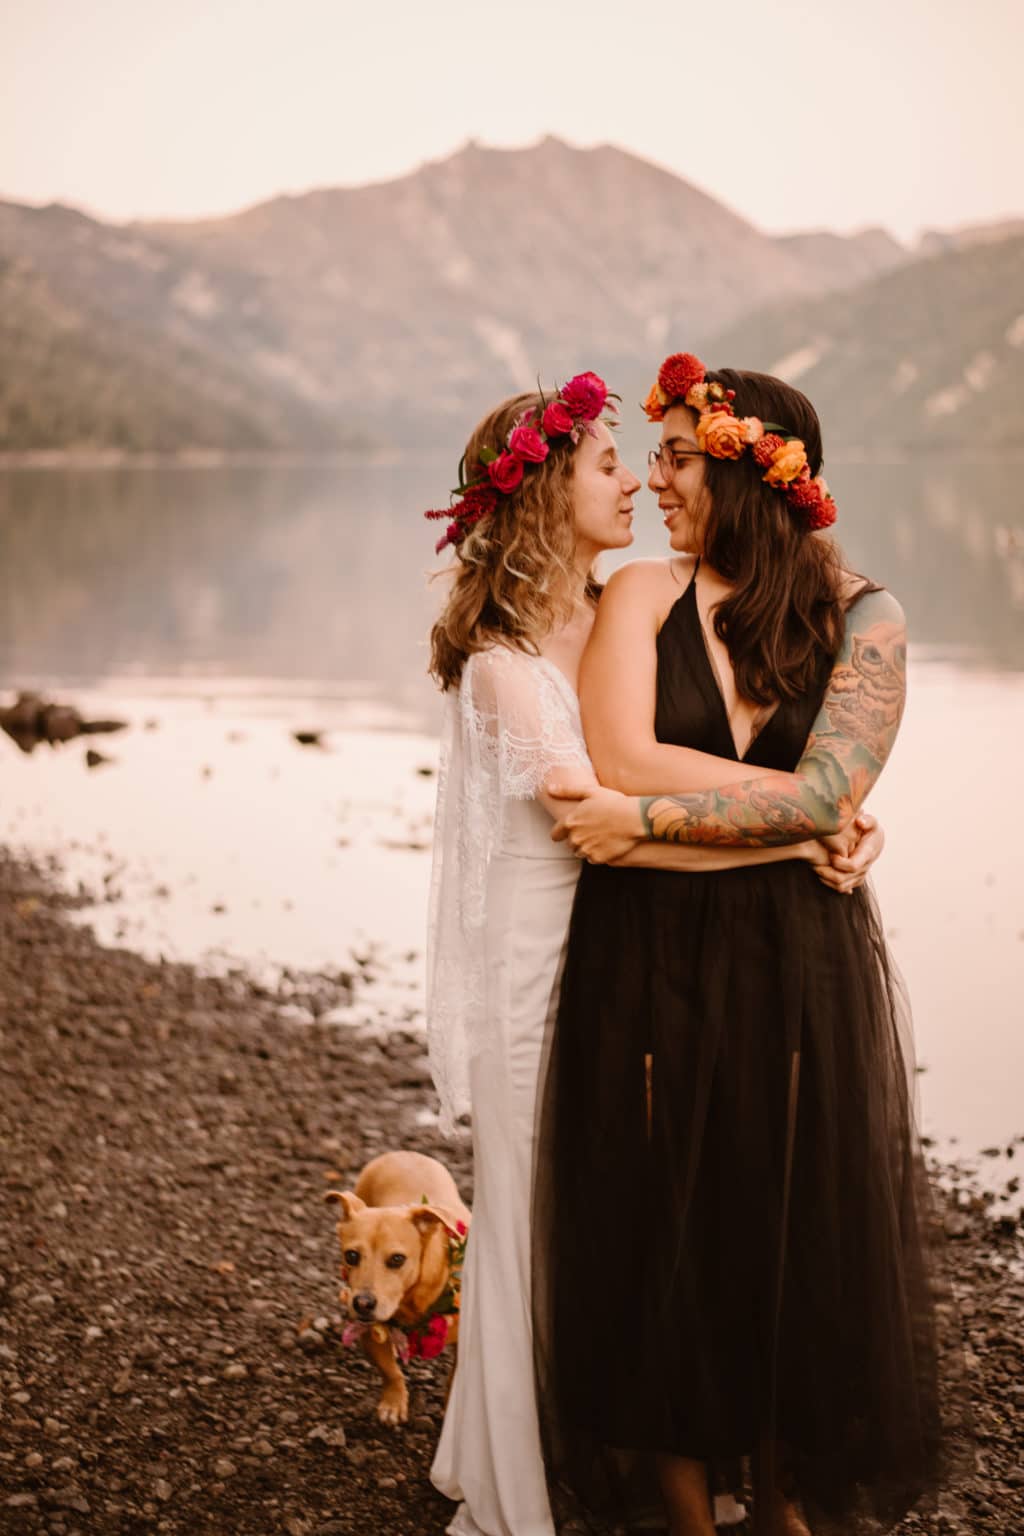 Perfect gay marriage hugging playing images of two tatooed woman near Mount Saint Helens lake in roman long black skirt and white bridal dress with floral headband crown and their brown dog by a talented wedding photographer during summer in July.